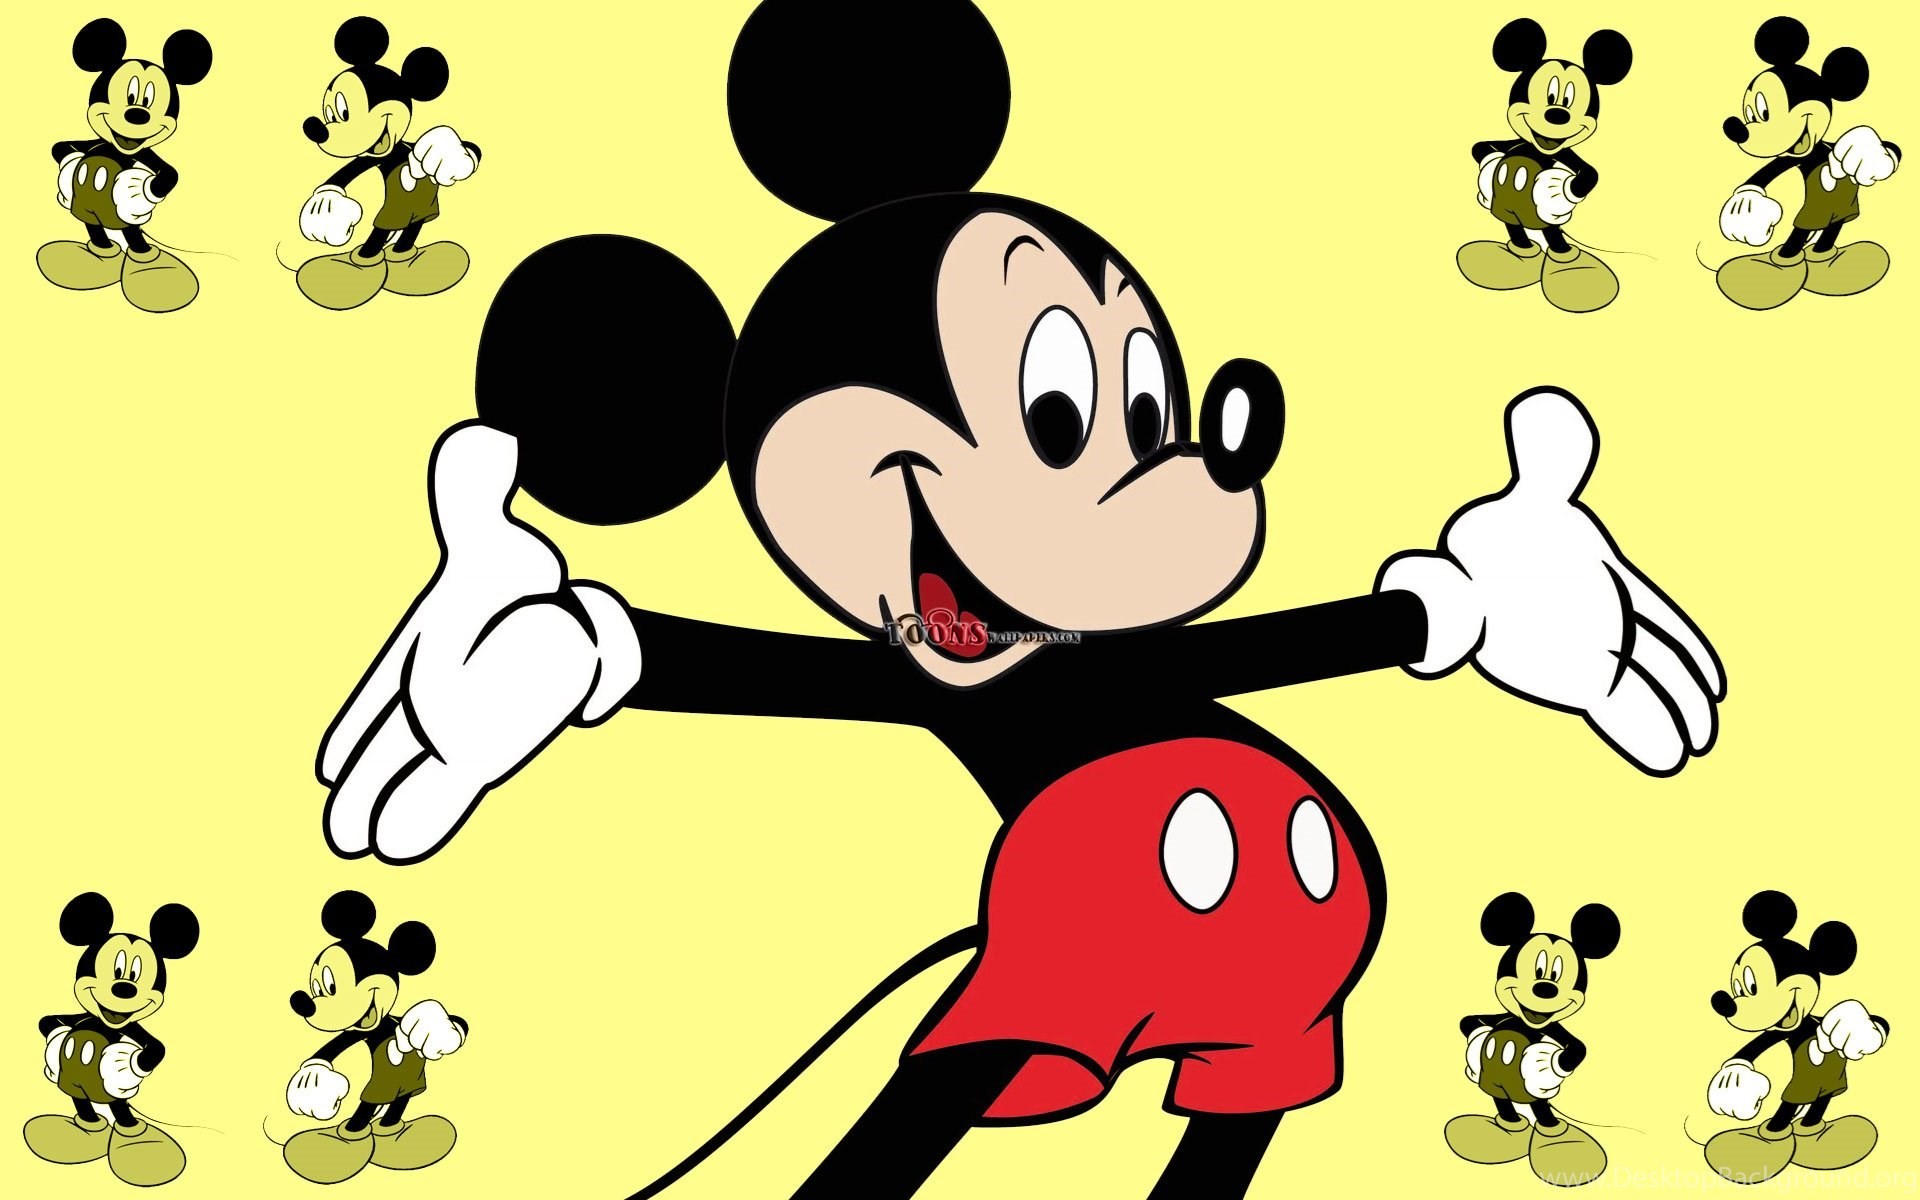 Baby Mickey Mouse Wallpaper Mickey Mouse 282 Hd Wallpapers Source Baby Minnie Mouse Wallpapers Wallpapers 1920x1200